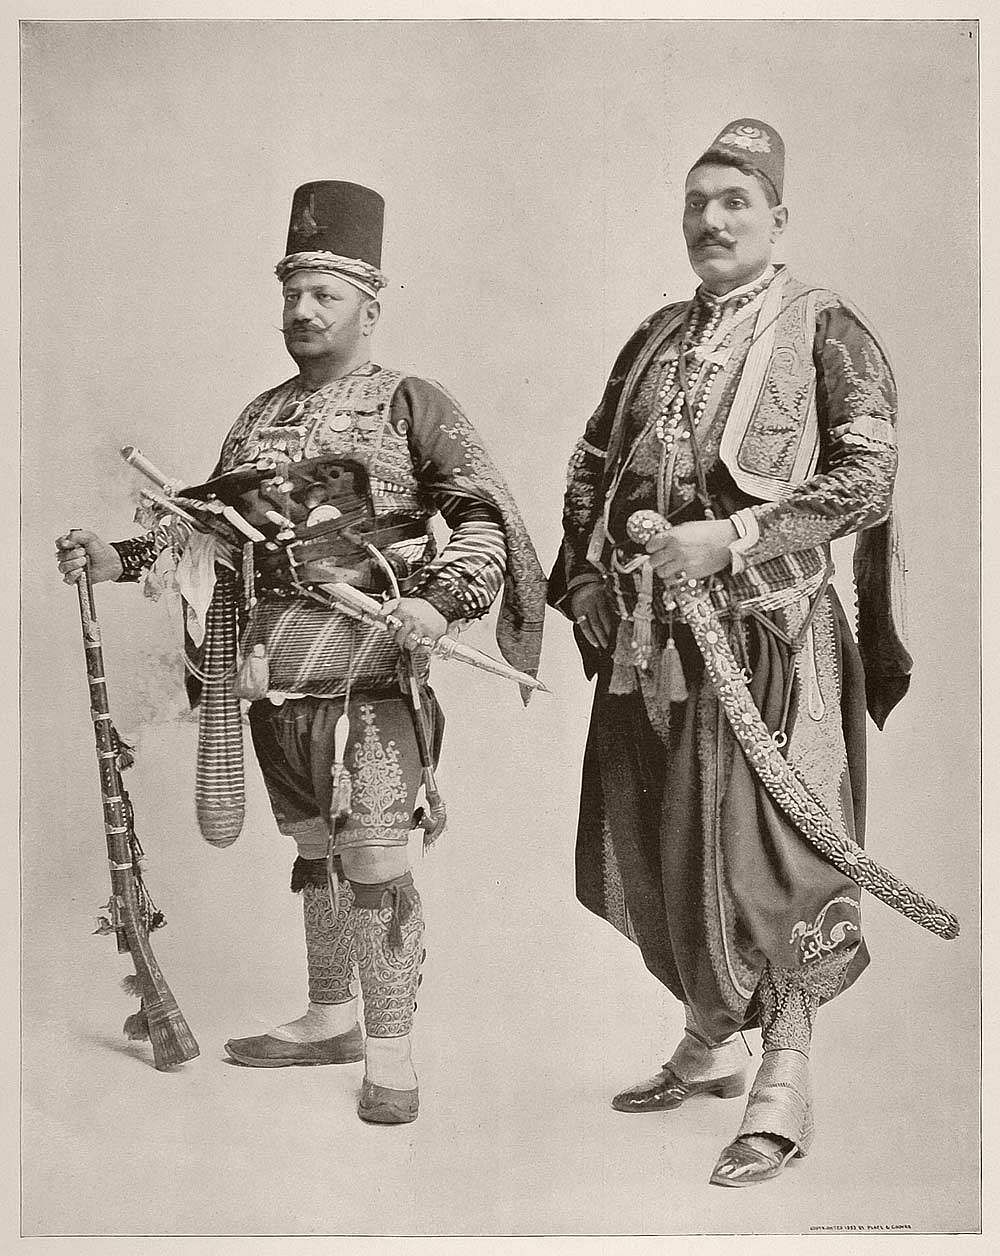 A Janissary at the Chicago world fair in 1893.